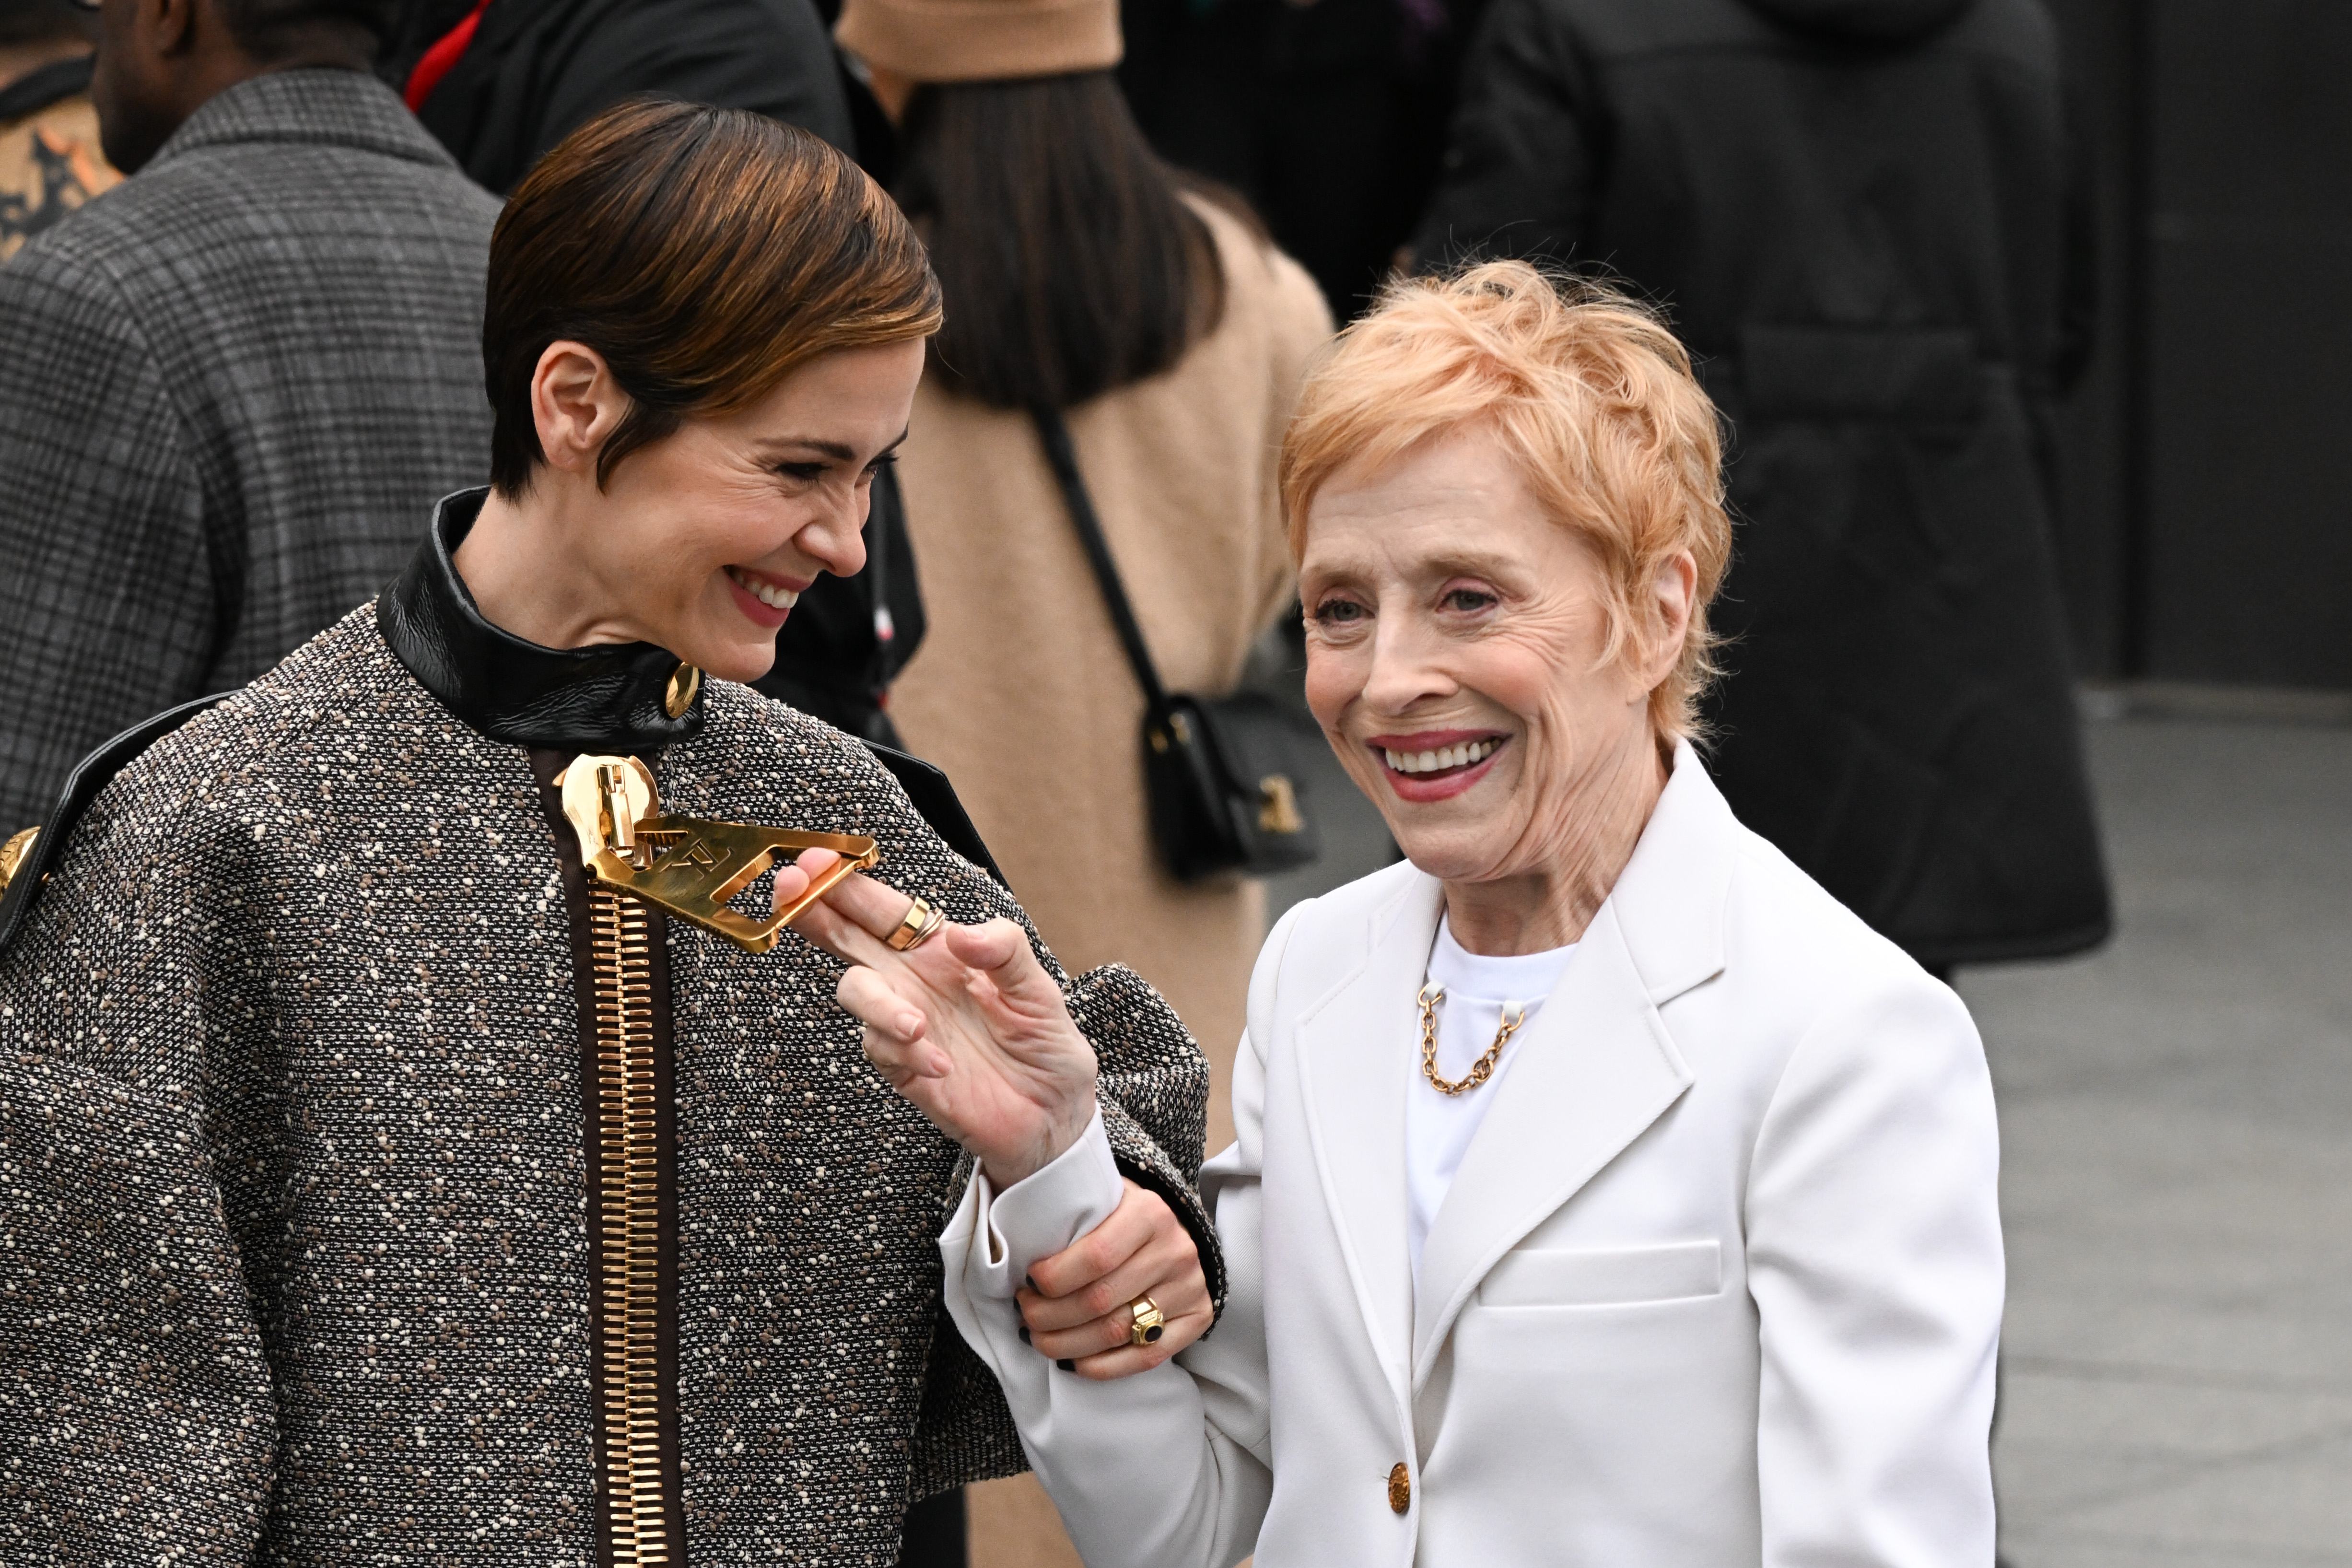 Sarah Paulson and Holland Taylor at the Louis Vuitton Womenswear Fall Winter 2023-2024 show during Paris Fashion Week on March 6, 2023. | Source: Getty Images